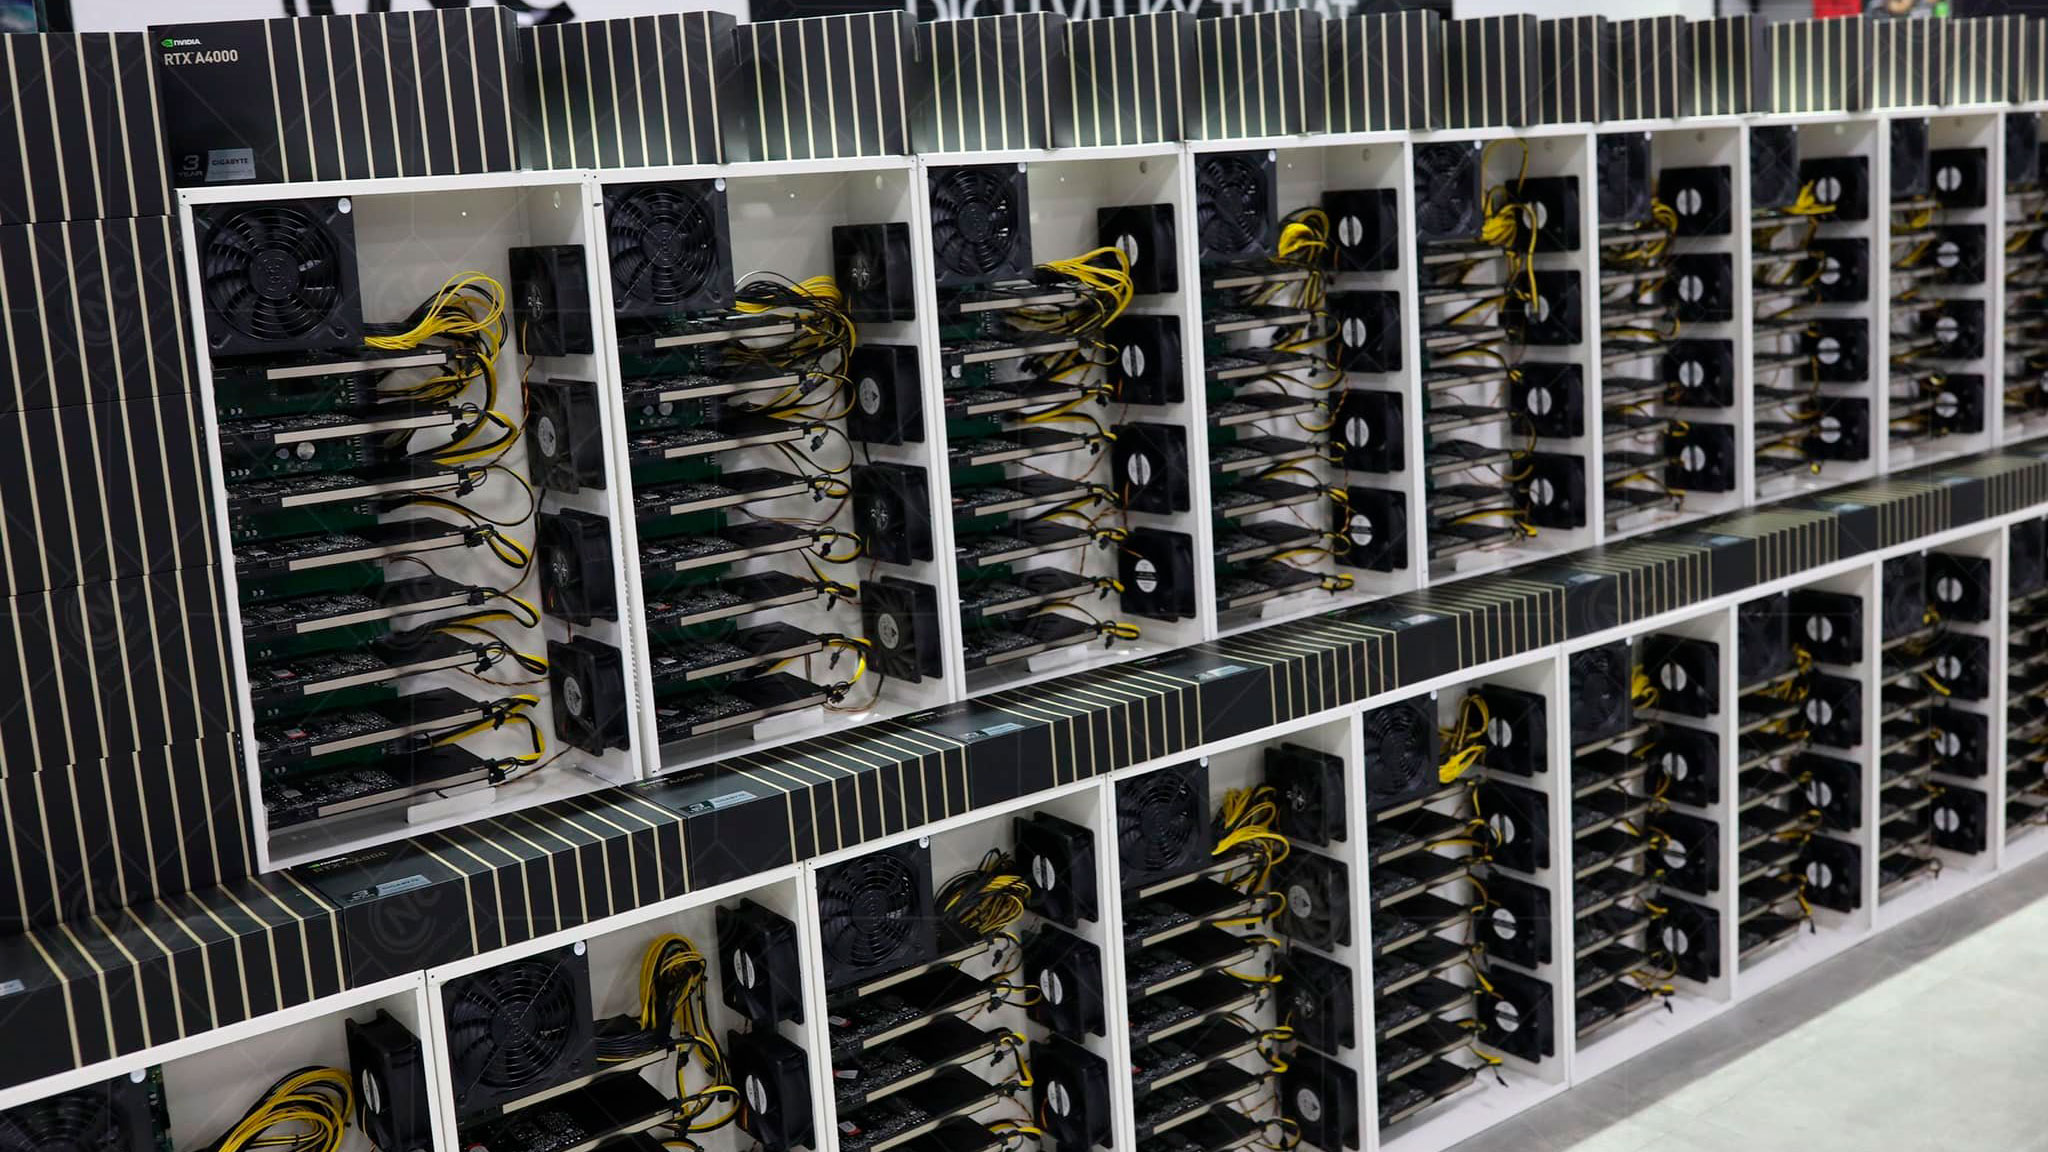 Retailer Targets Nvidia's RTX A4000 GPUs for Crypto Mining Tom's Hardware